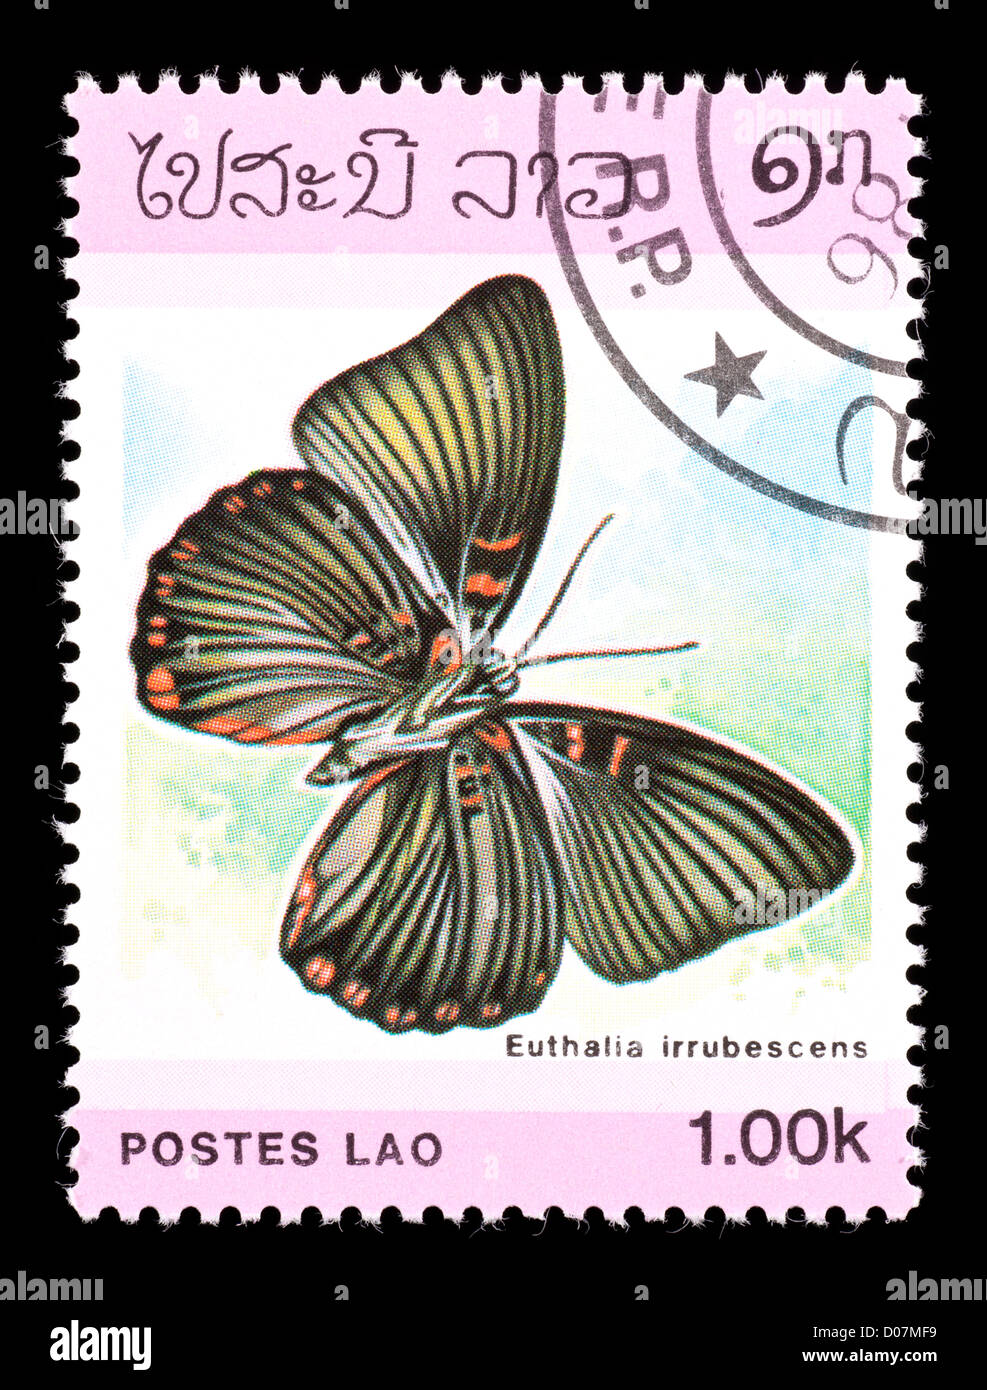 Postage stamp from Laos depicting a tropical butterfly (Euthalia irrubescens) Stock Photo